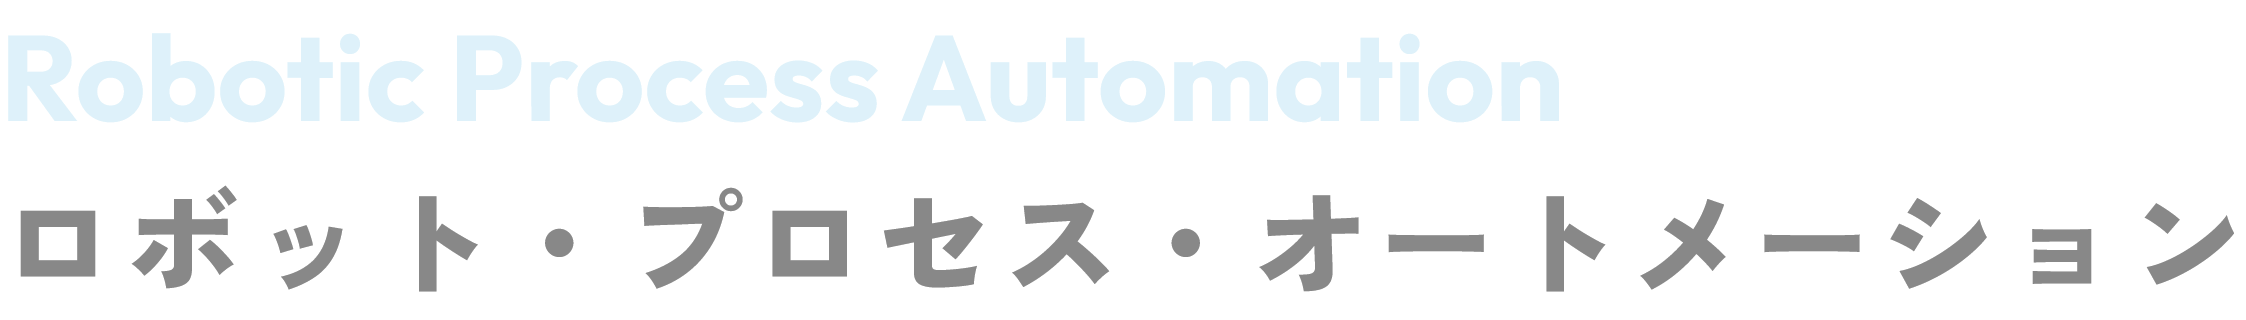 Robotic Process Automation ロボット・プロセス・オートメーション